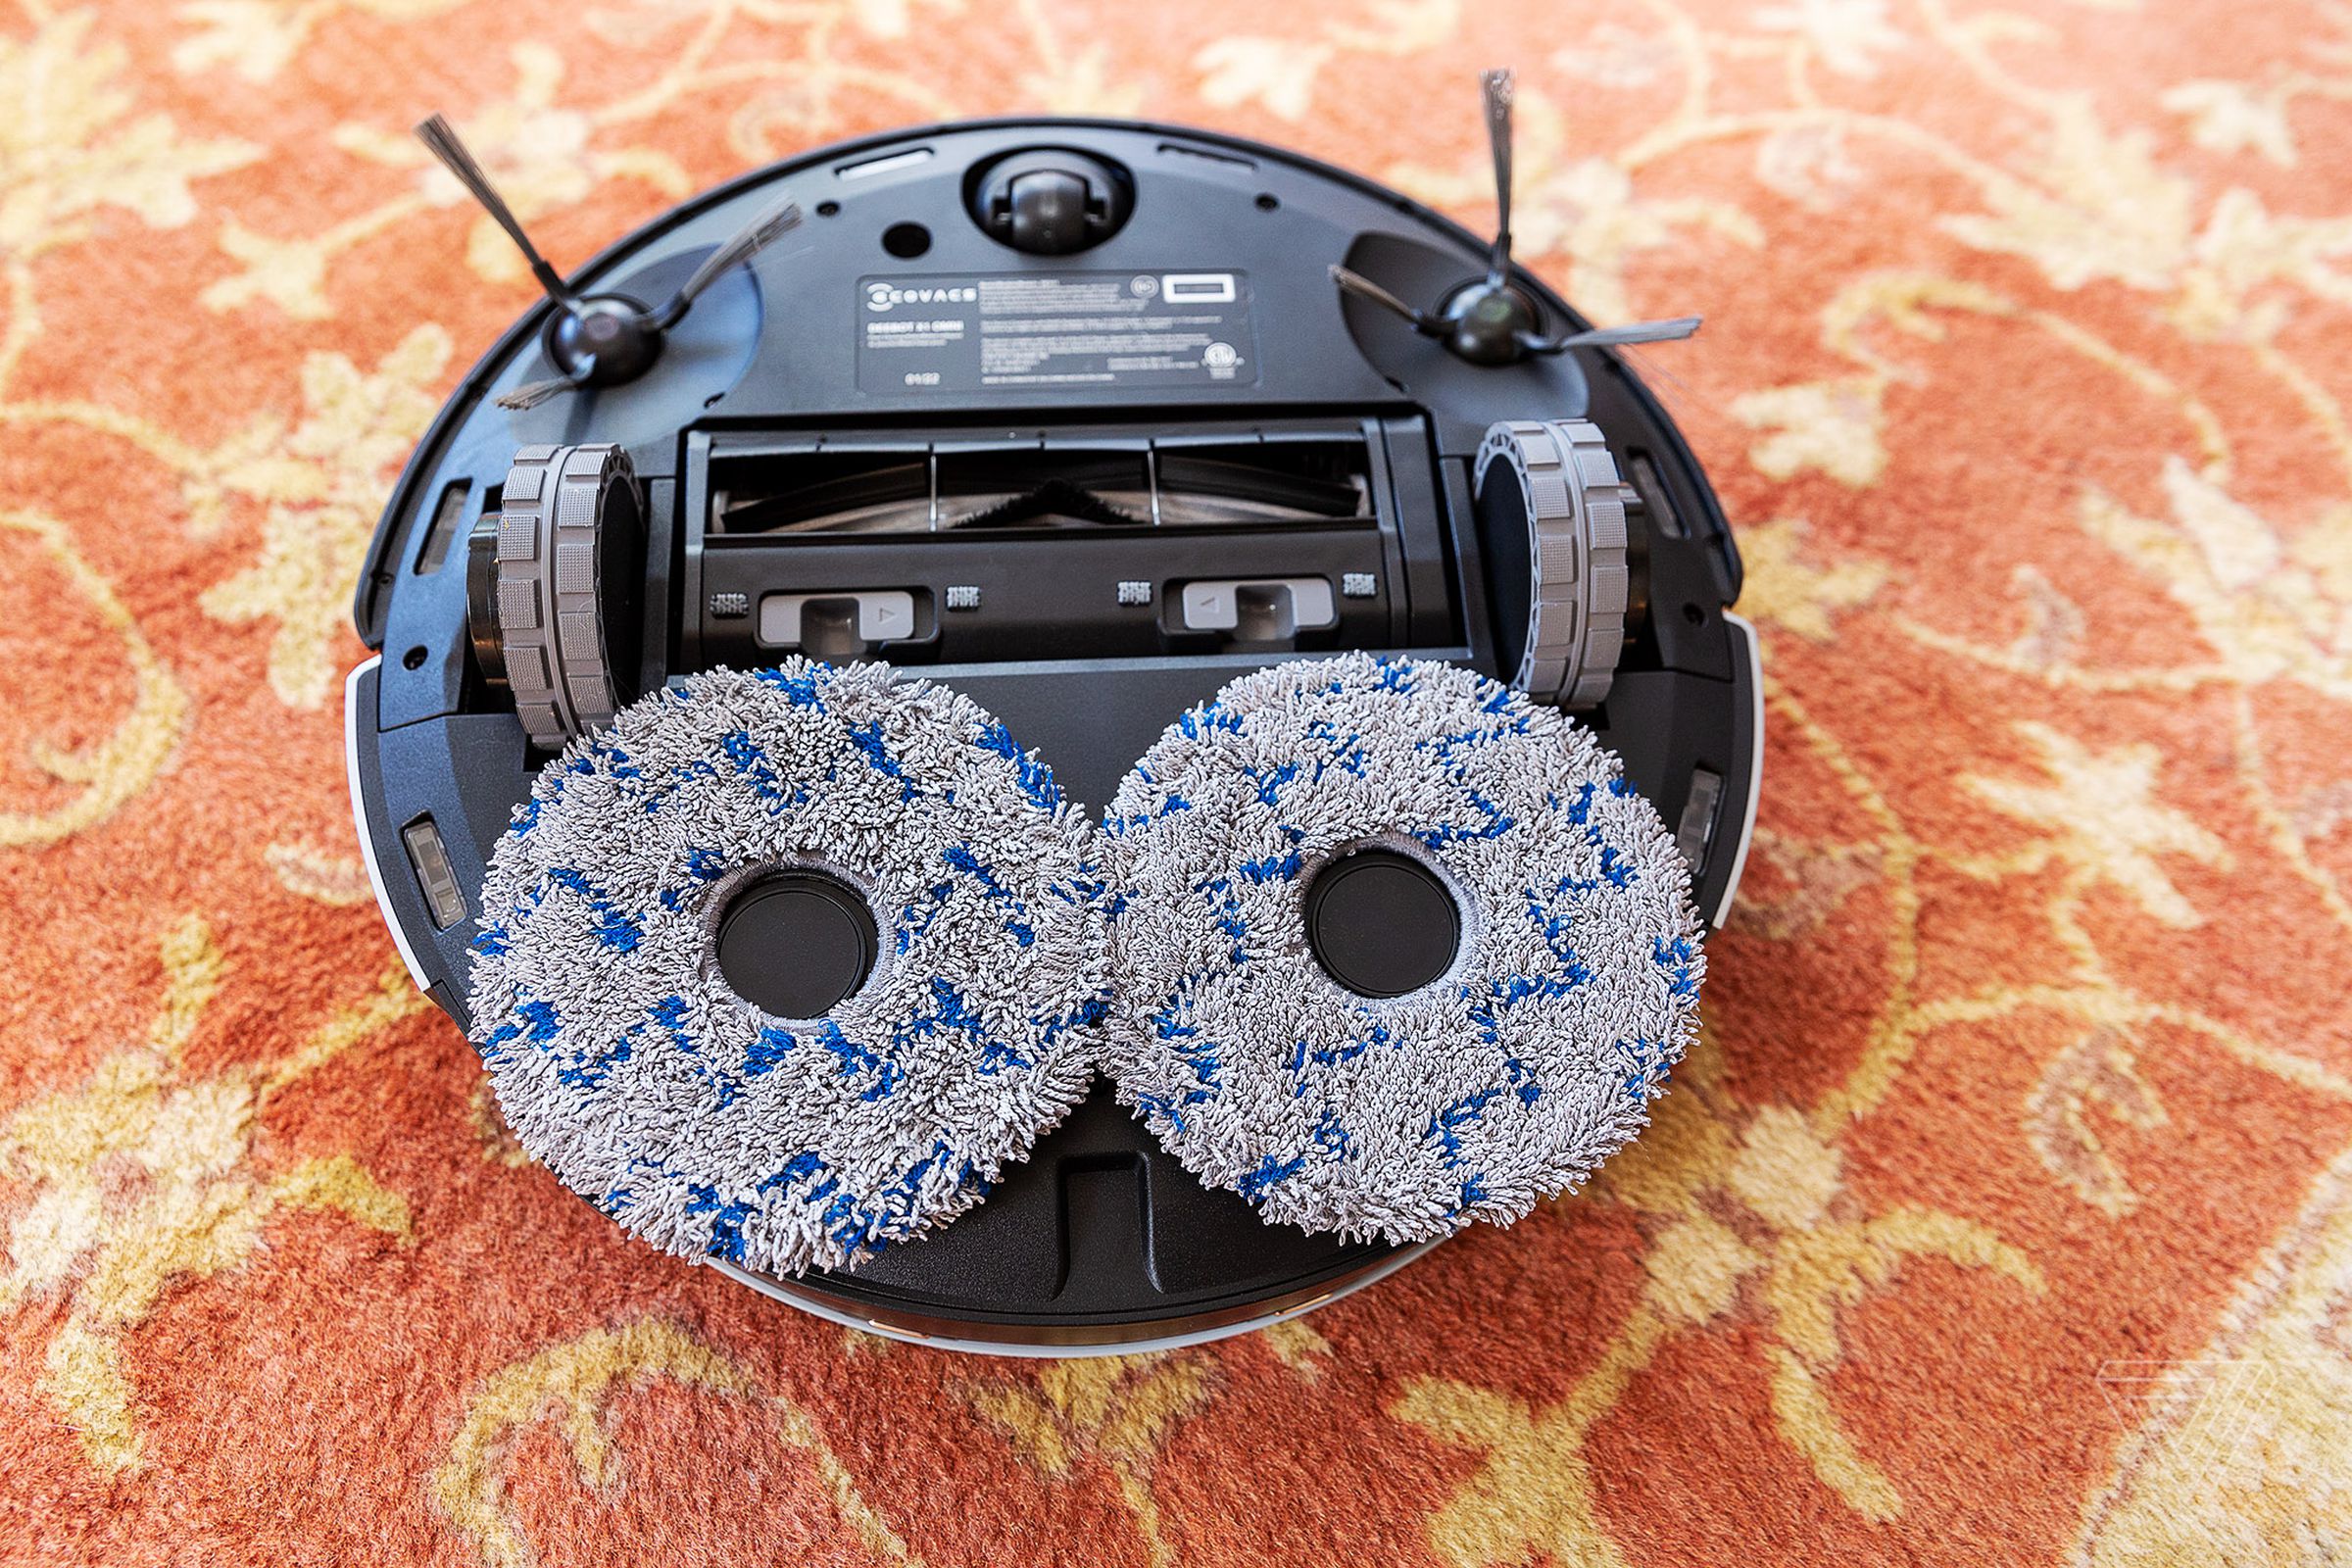 Underneath the Deebot X1 Omni are two rotating brushes and two removable mop pads.  I can't help but see a face with an anxious expression asking 